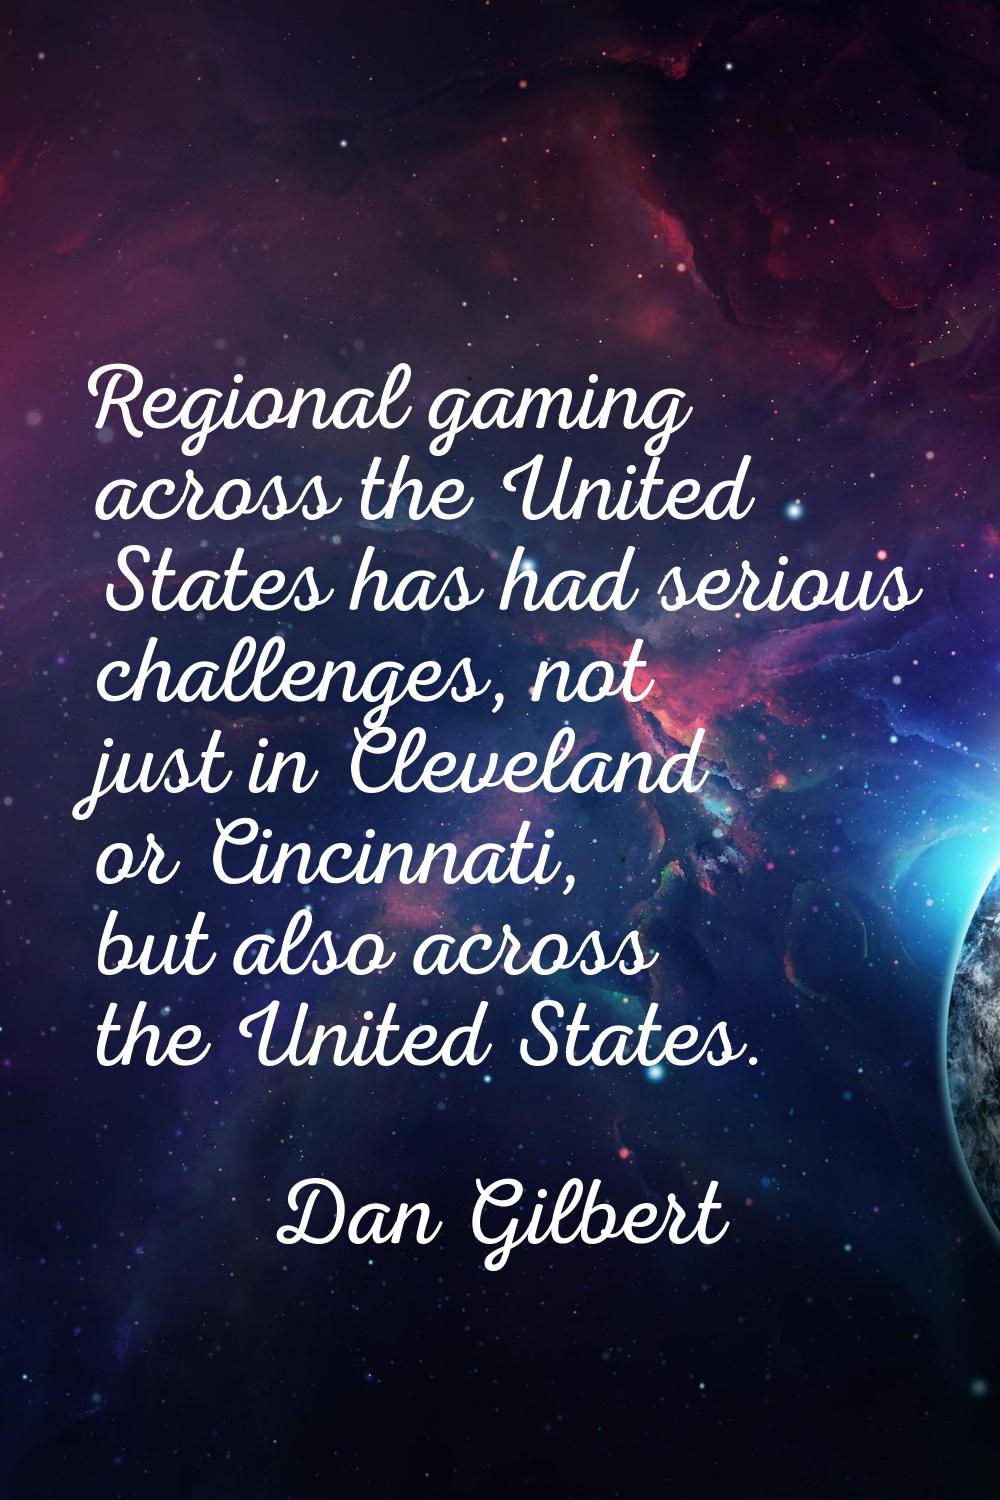 Regional gaming across the United States has had serious challenges, not just in Cleveland or Cinci